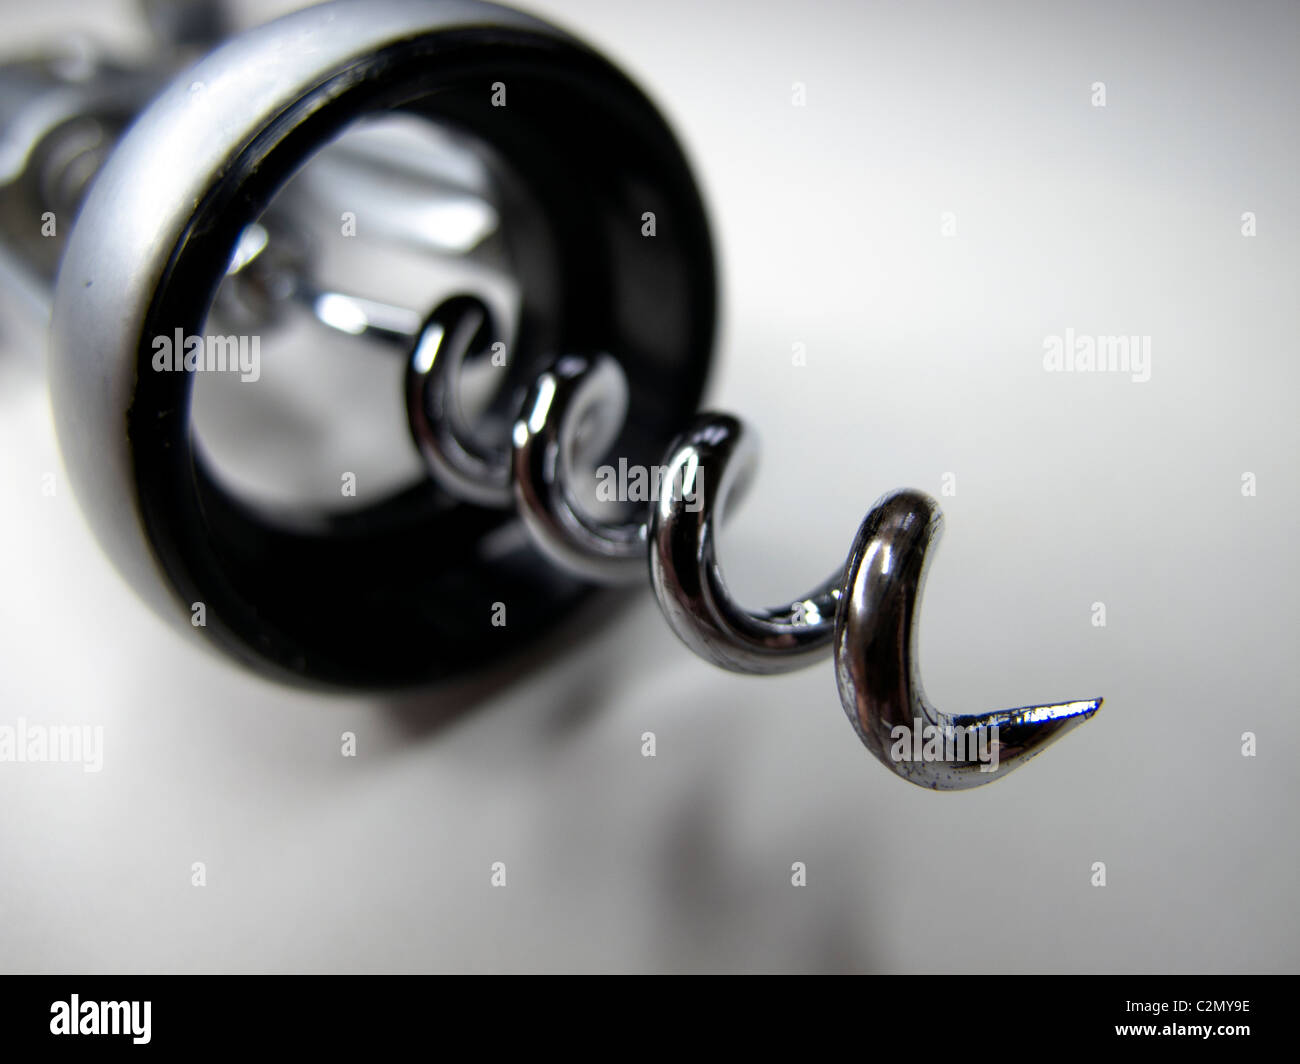 Corkscrew for opening corked wine bottles Stock Photo